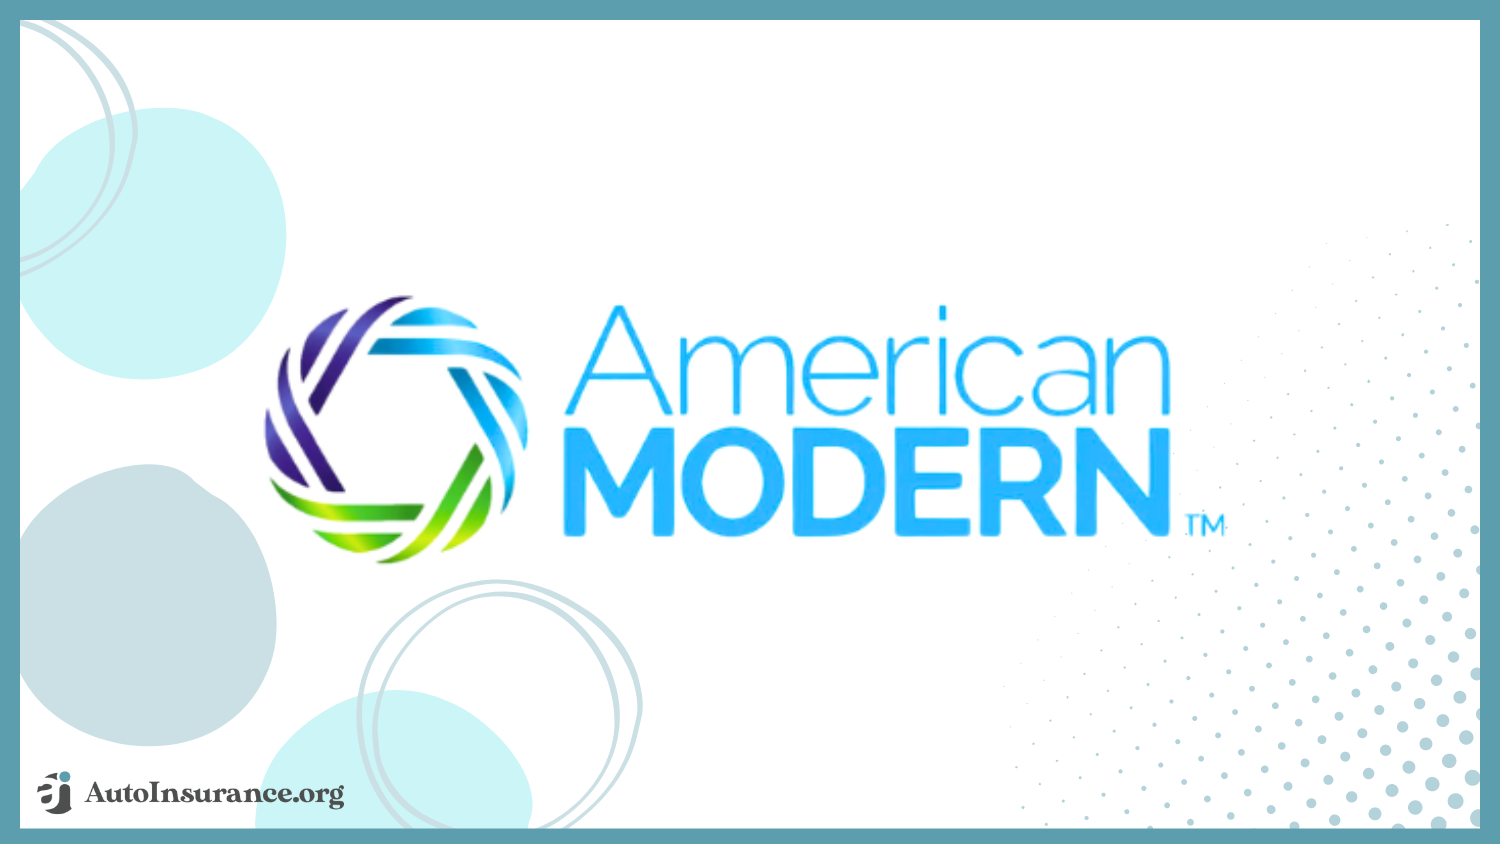 American Modern: Best Auto Insurance Companies for Modified Cars